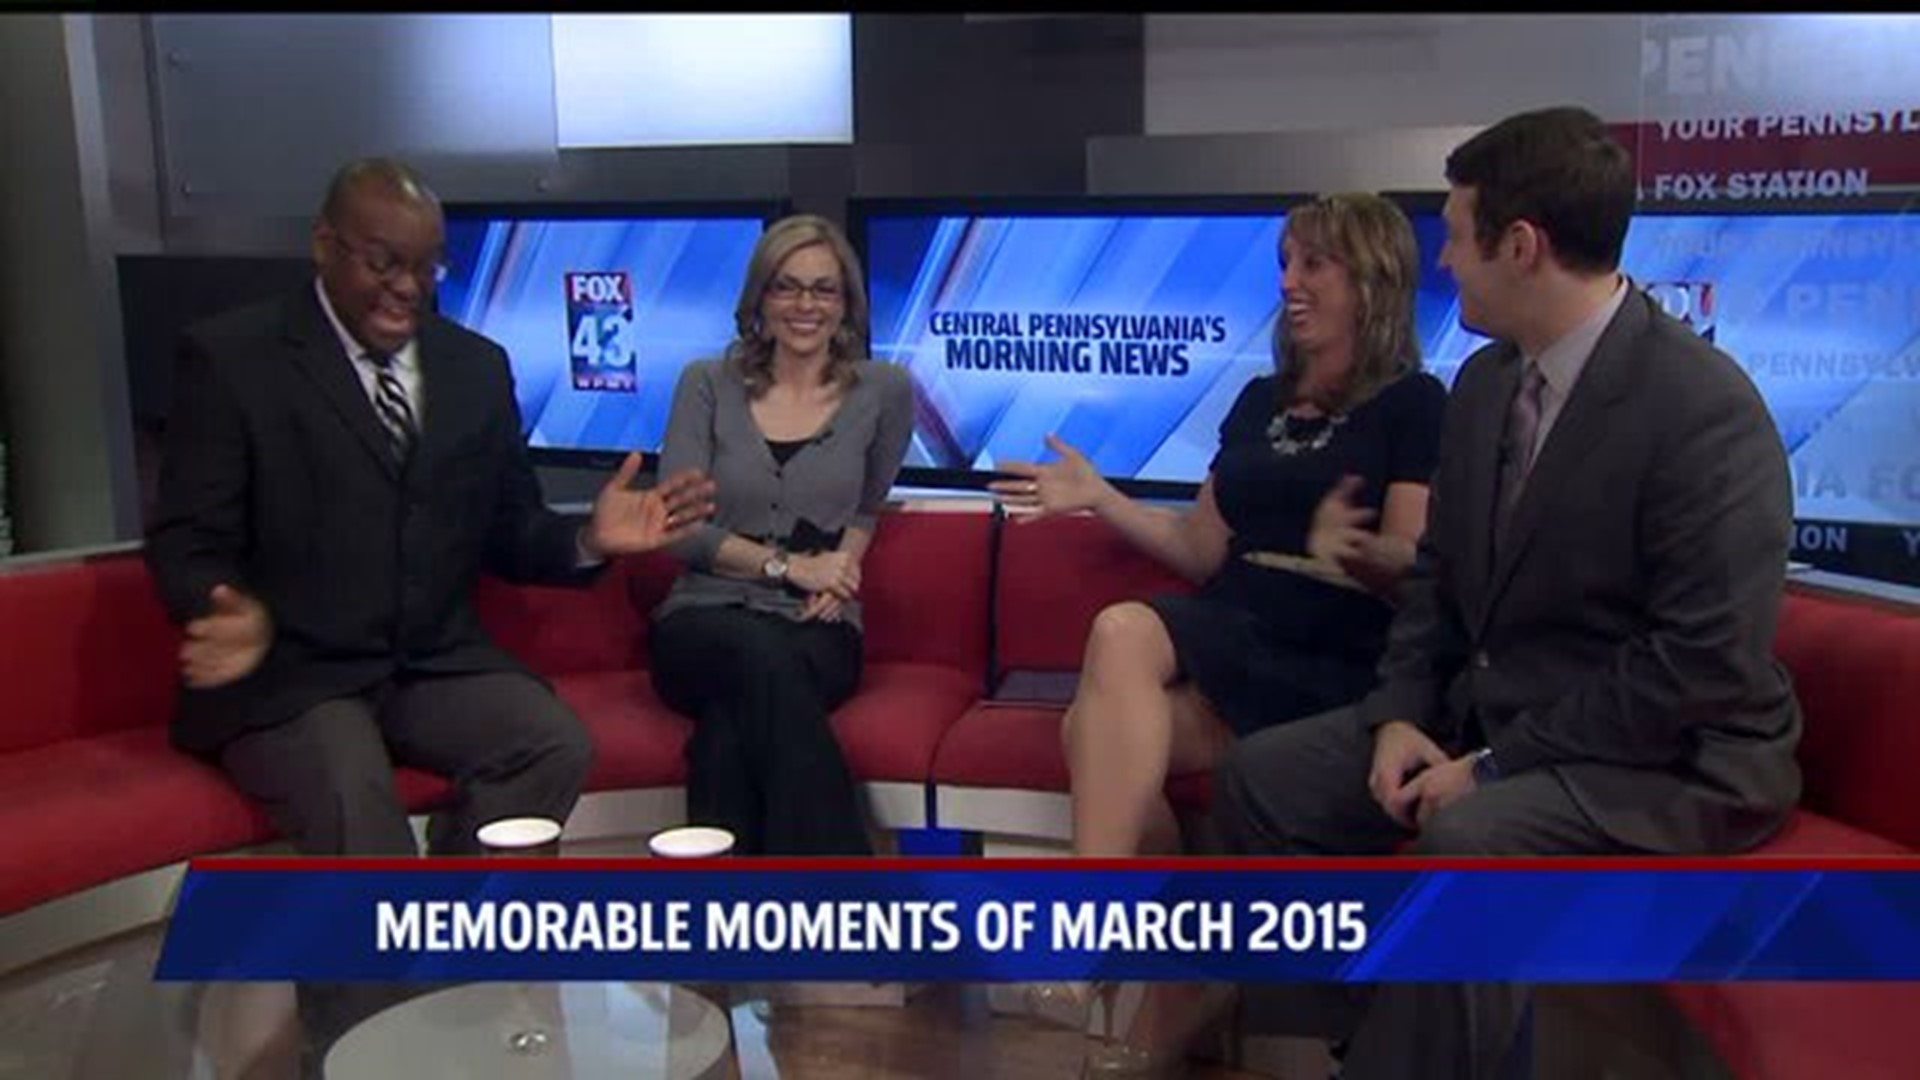 VIDEO: Memorable Moments from FOX43 Morning News March 2015